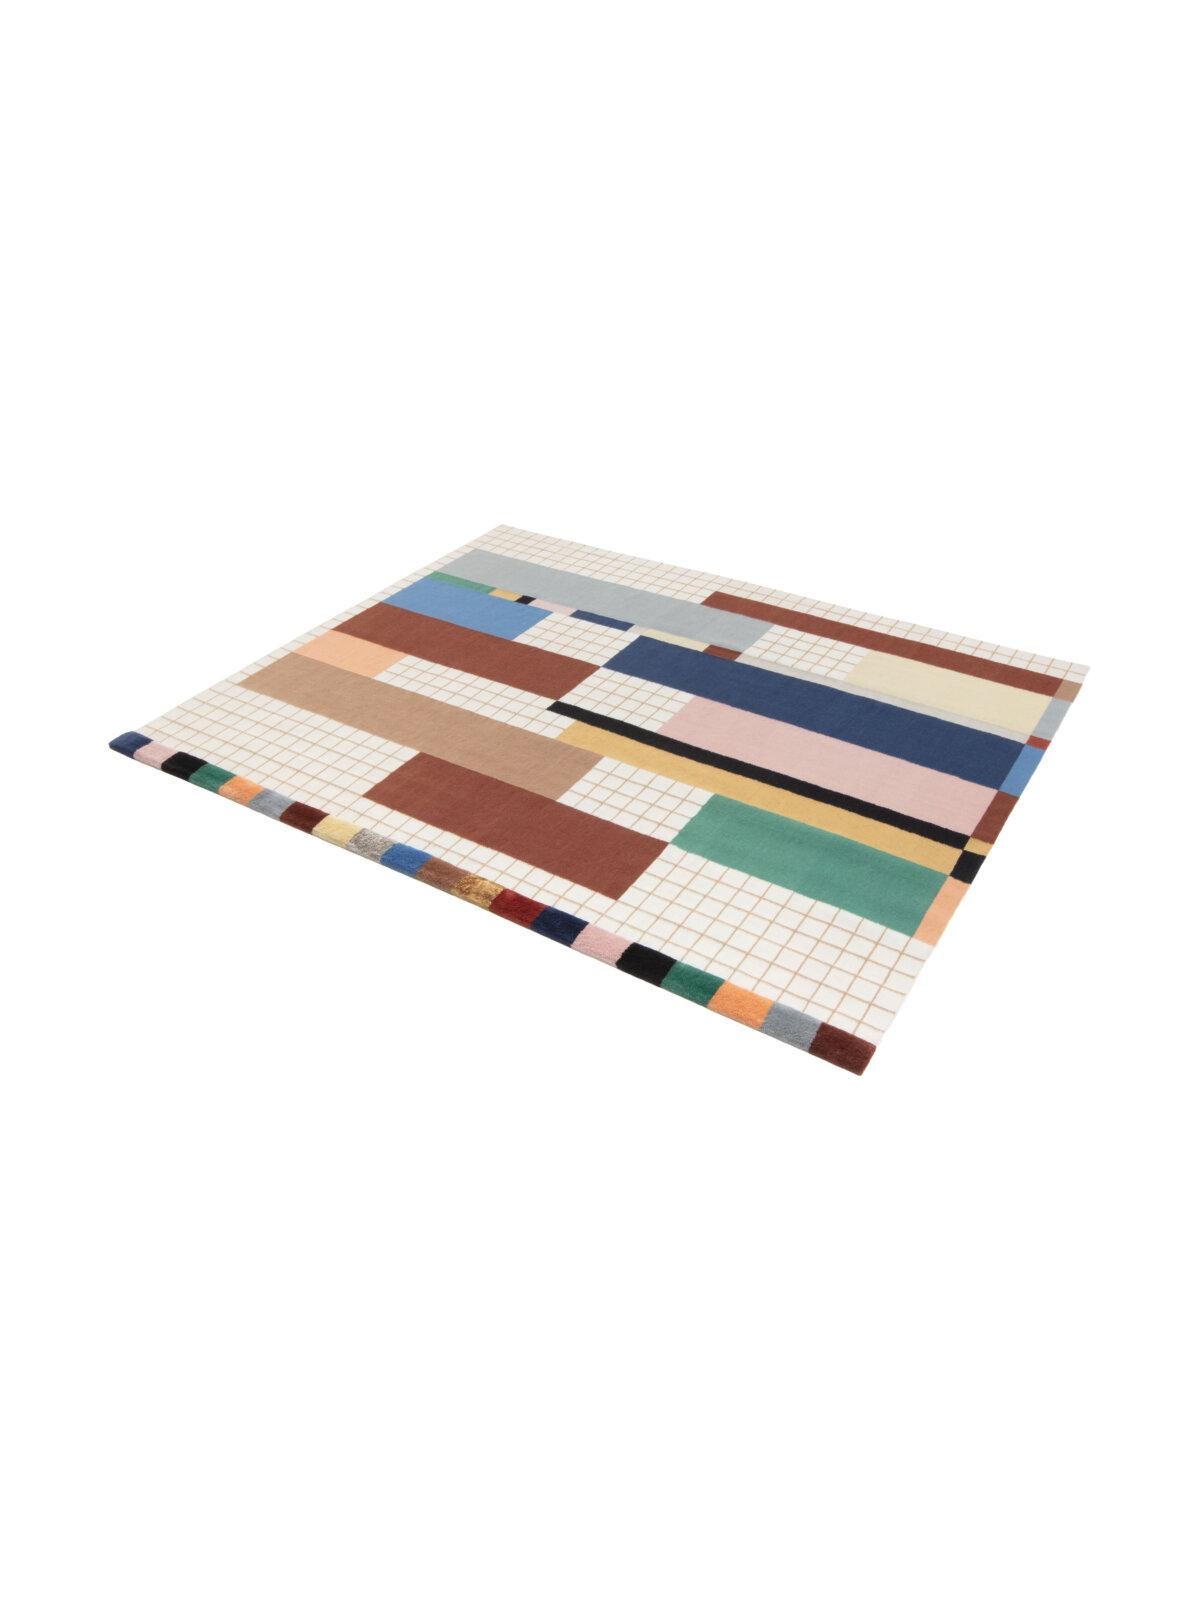 cc-tapis RAAG COLLECTION - RAAG RECTANGULAR GRID 1 handmade rug by  Doshi Levien In New Condition For Sale In Brooklyn, NY